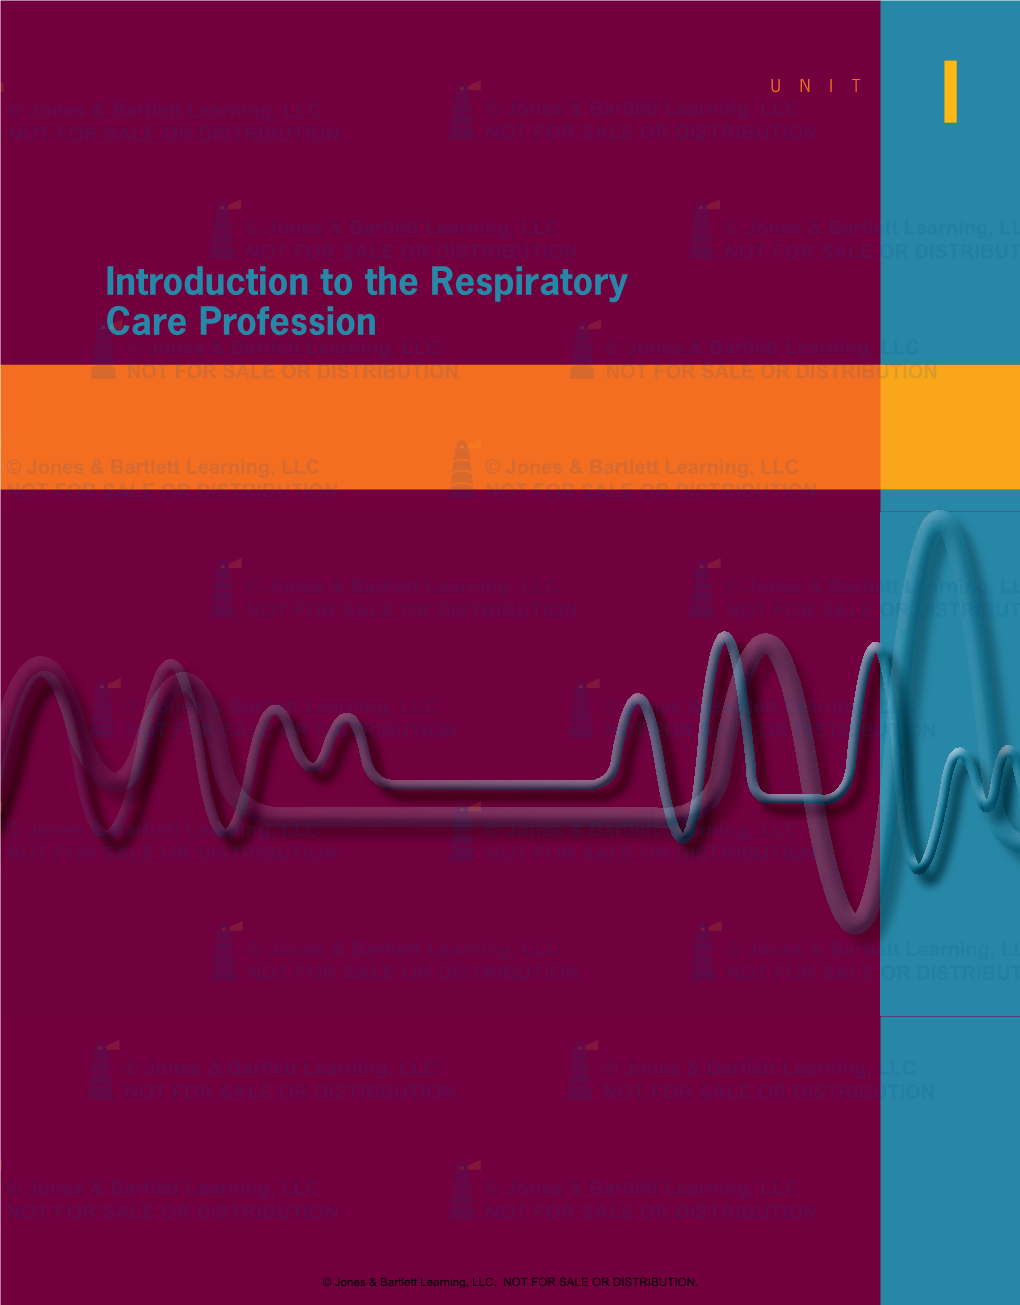 Introduction to the Respiratory Care Profession